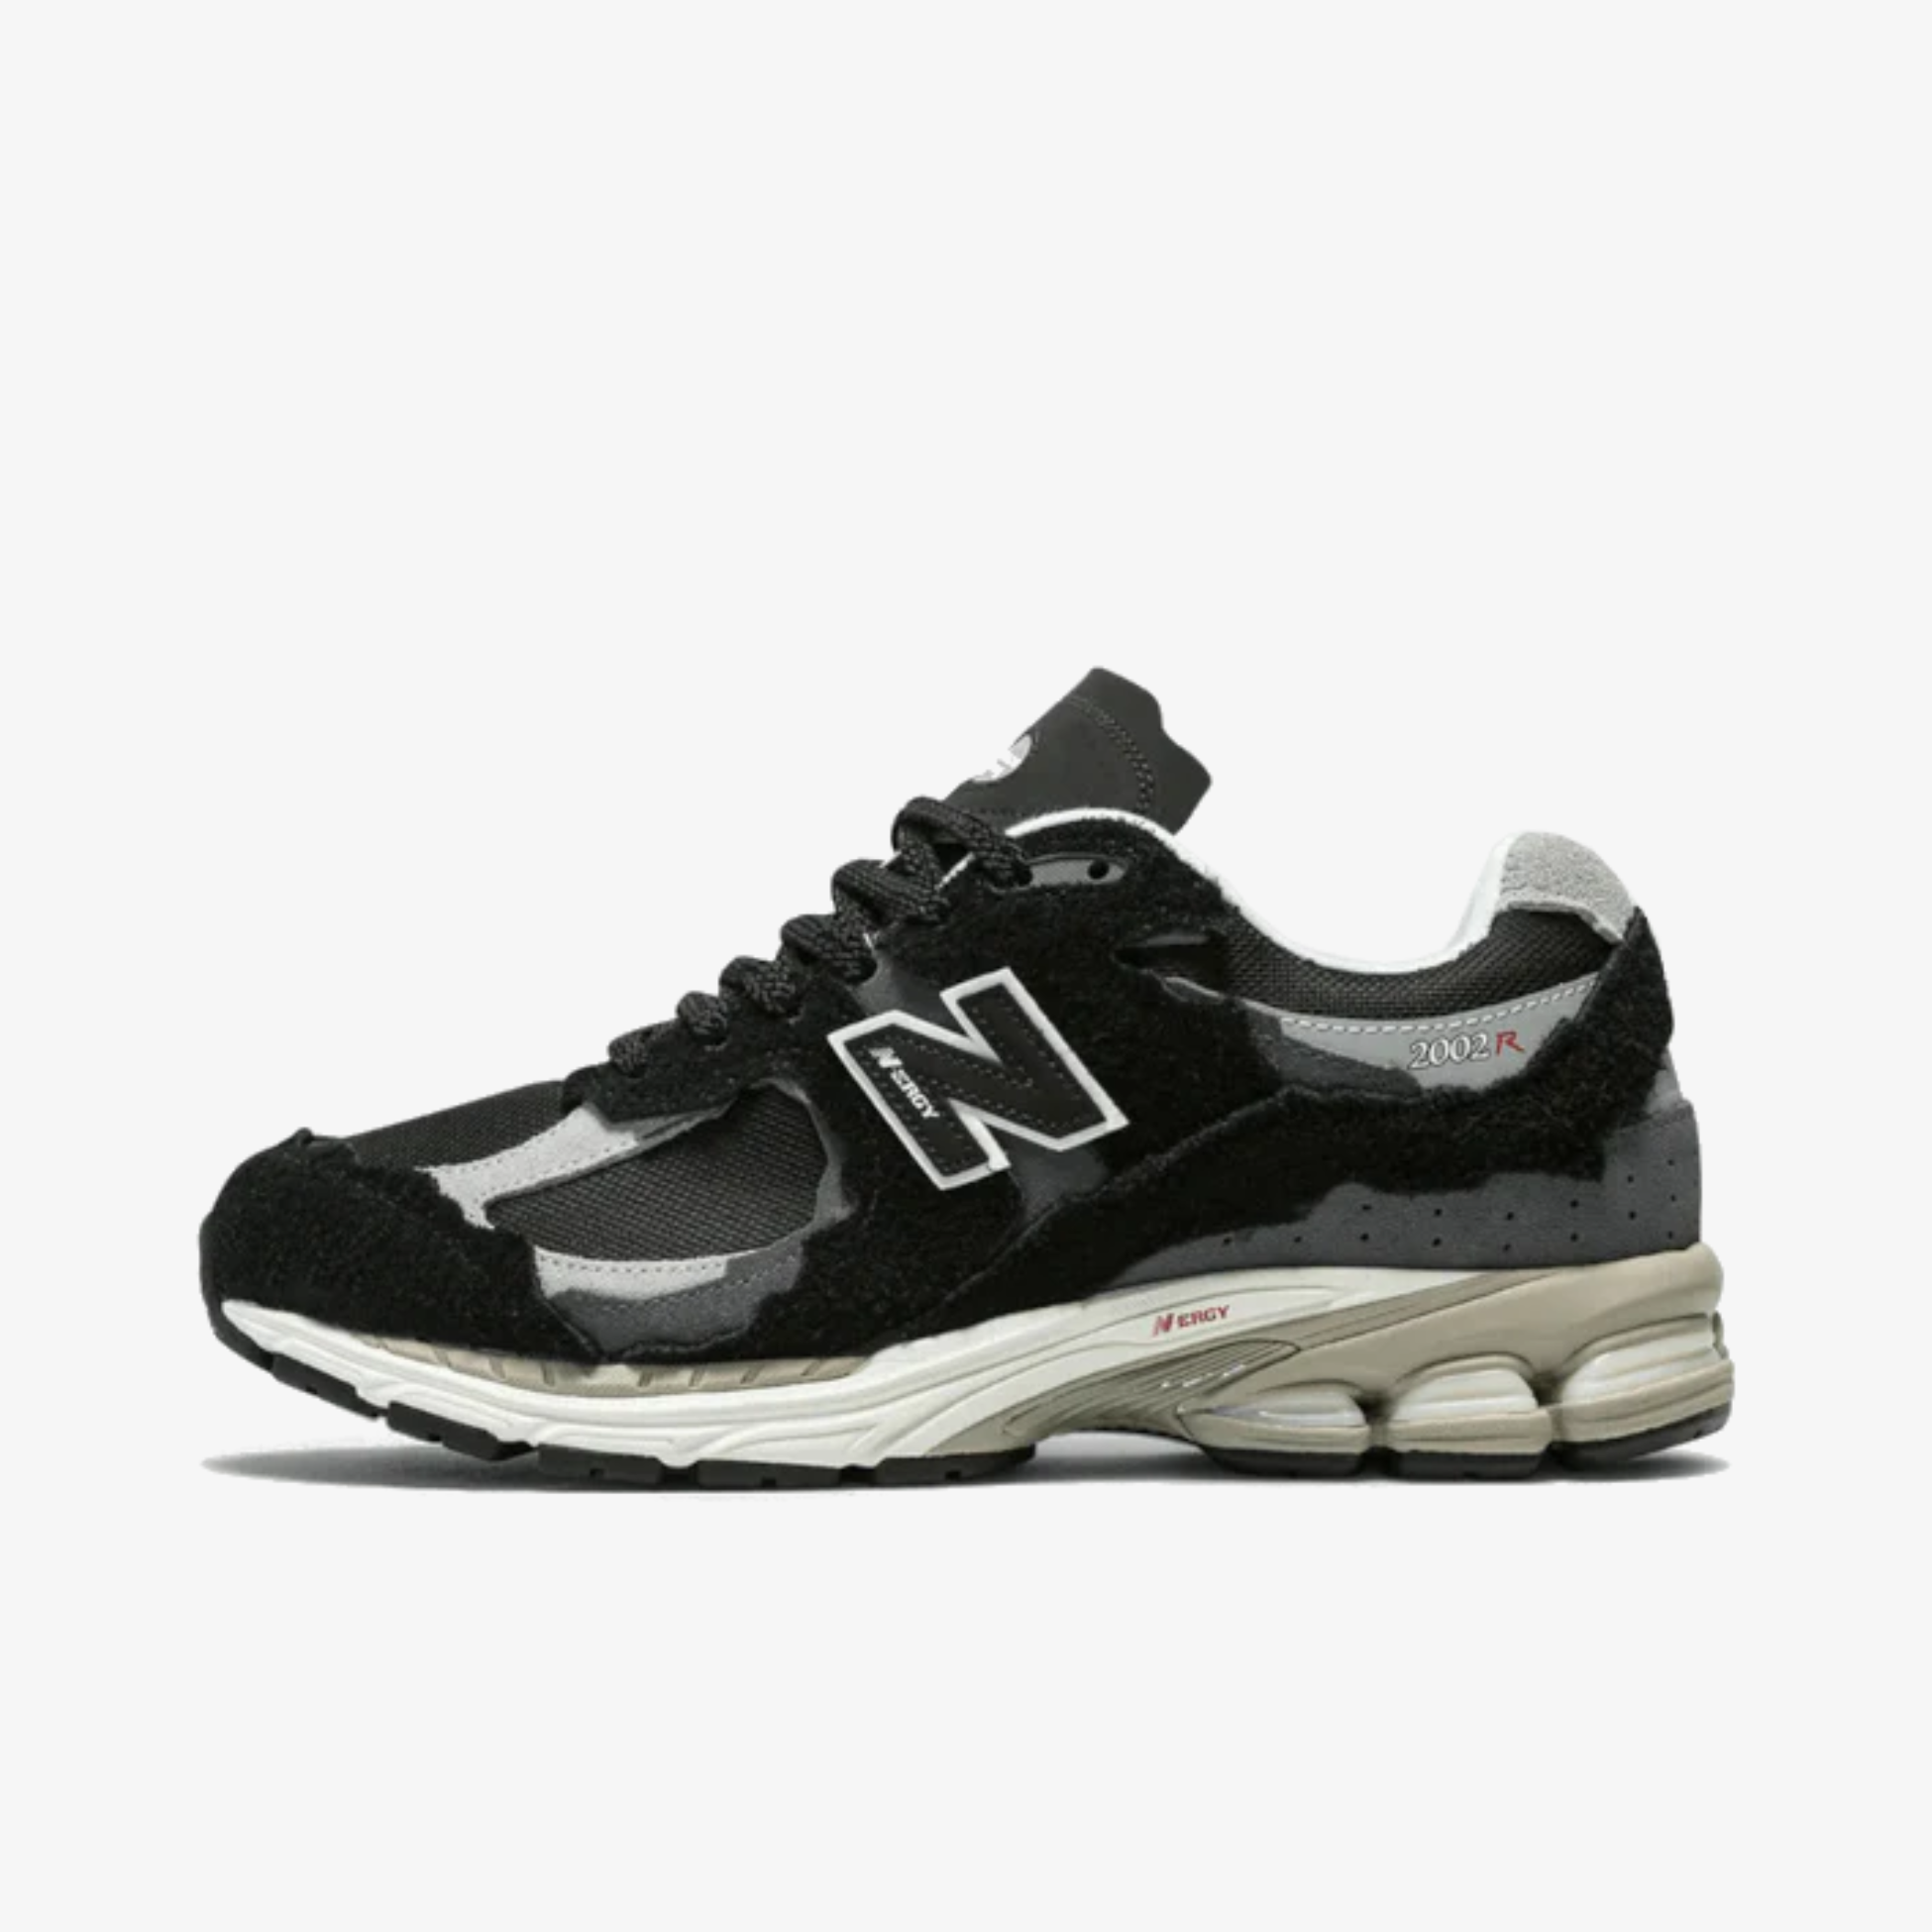 New Balance 2002R Protection Pack Noir